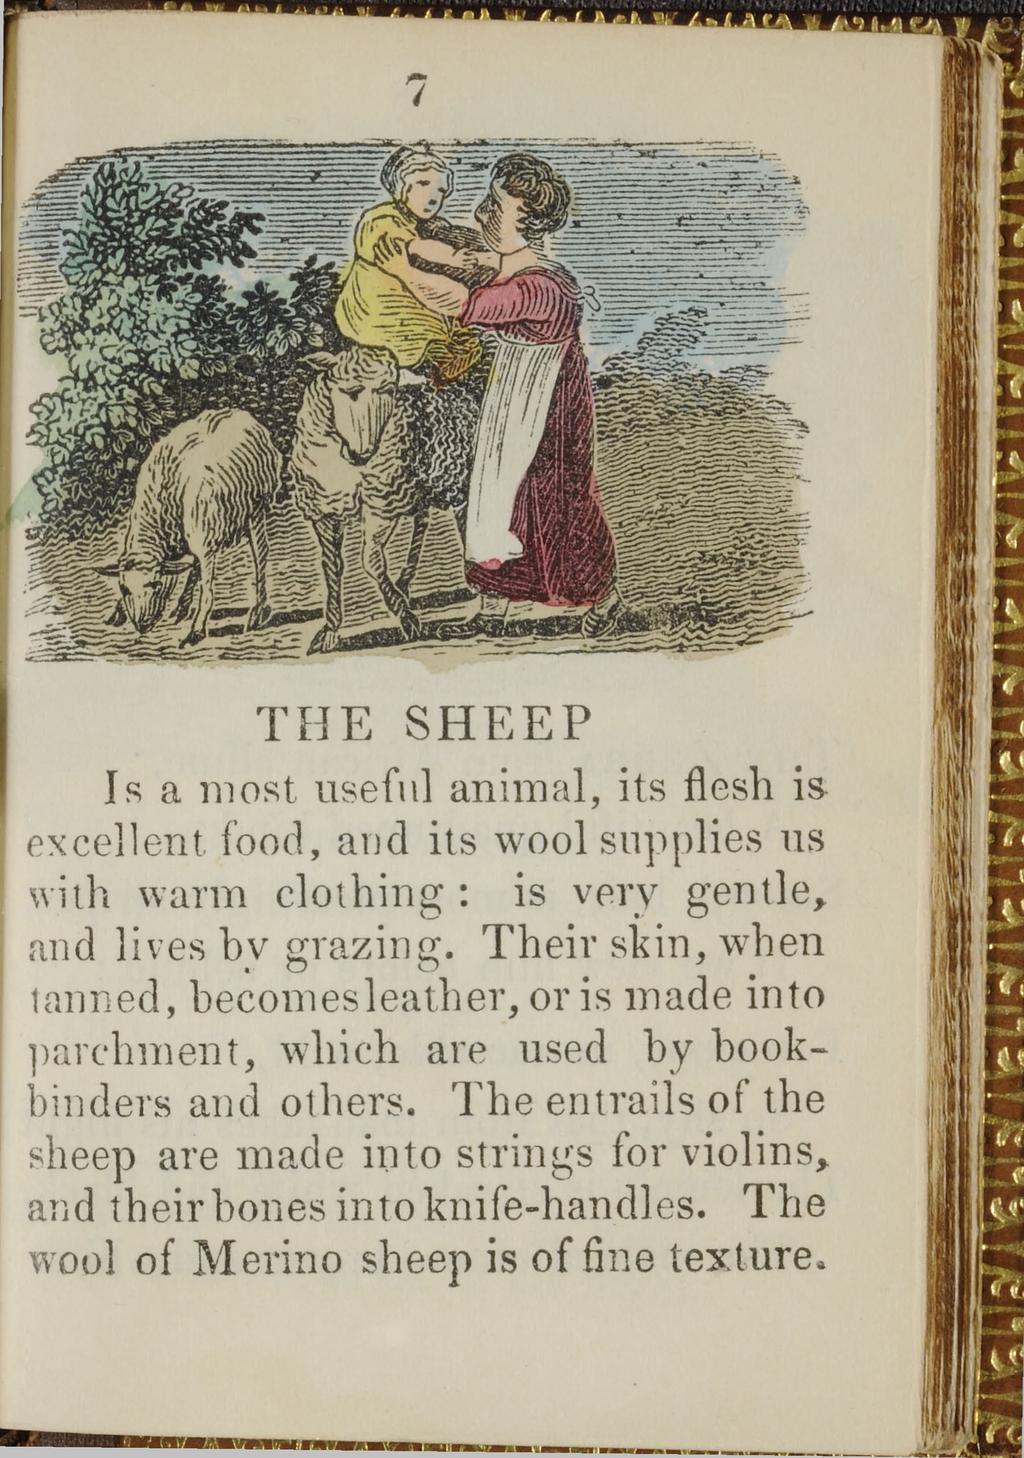 7 T H E S H E E P Is a most useful animal, its flesh is excellent food, and its wool supplies us with warm clothing : is very gentle, and lives by grazing.